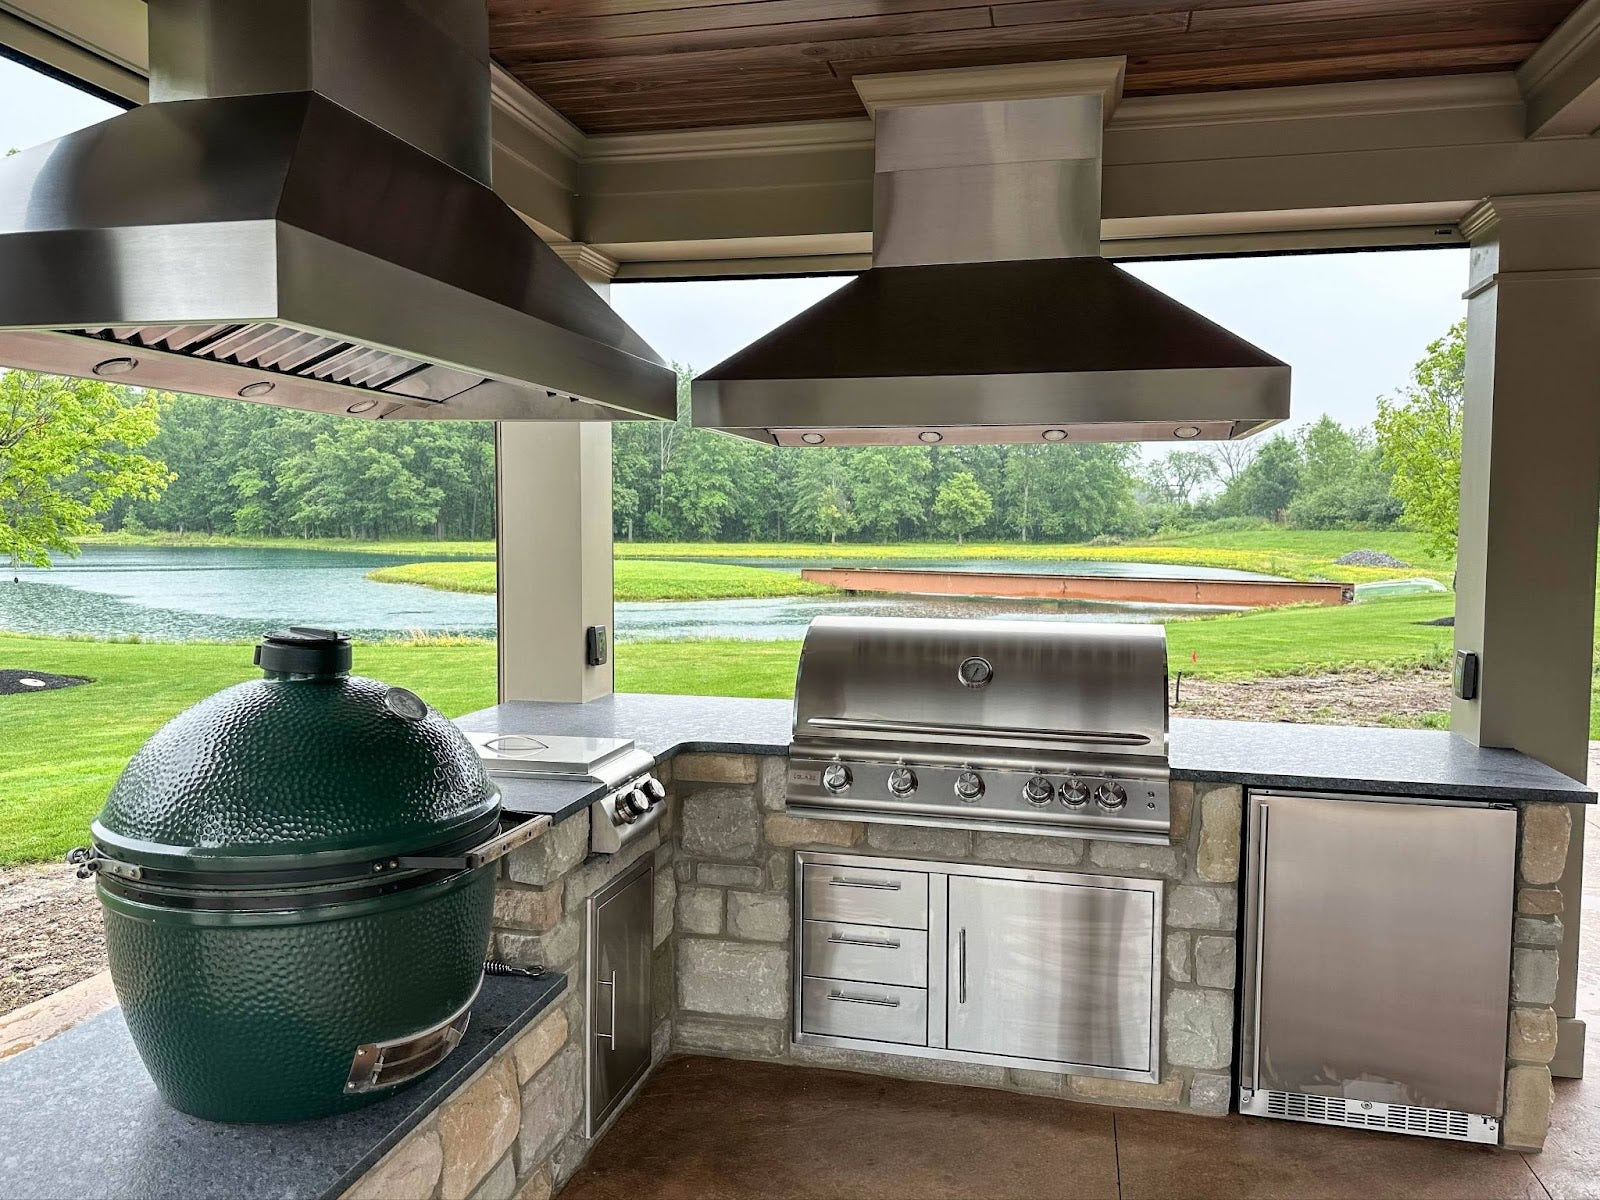 Sophisticated and functional outdoor grilling area equipped with a modern BBQ, green egg smoker, and a refrigeration unit, set against a picturesque pond backdrop.